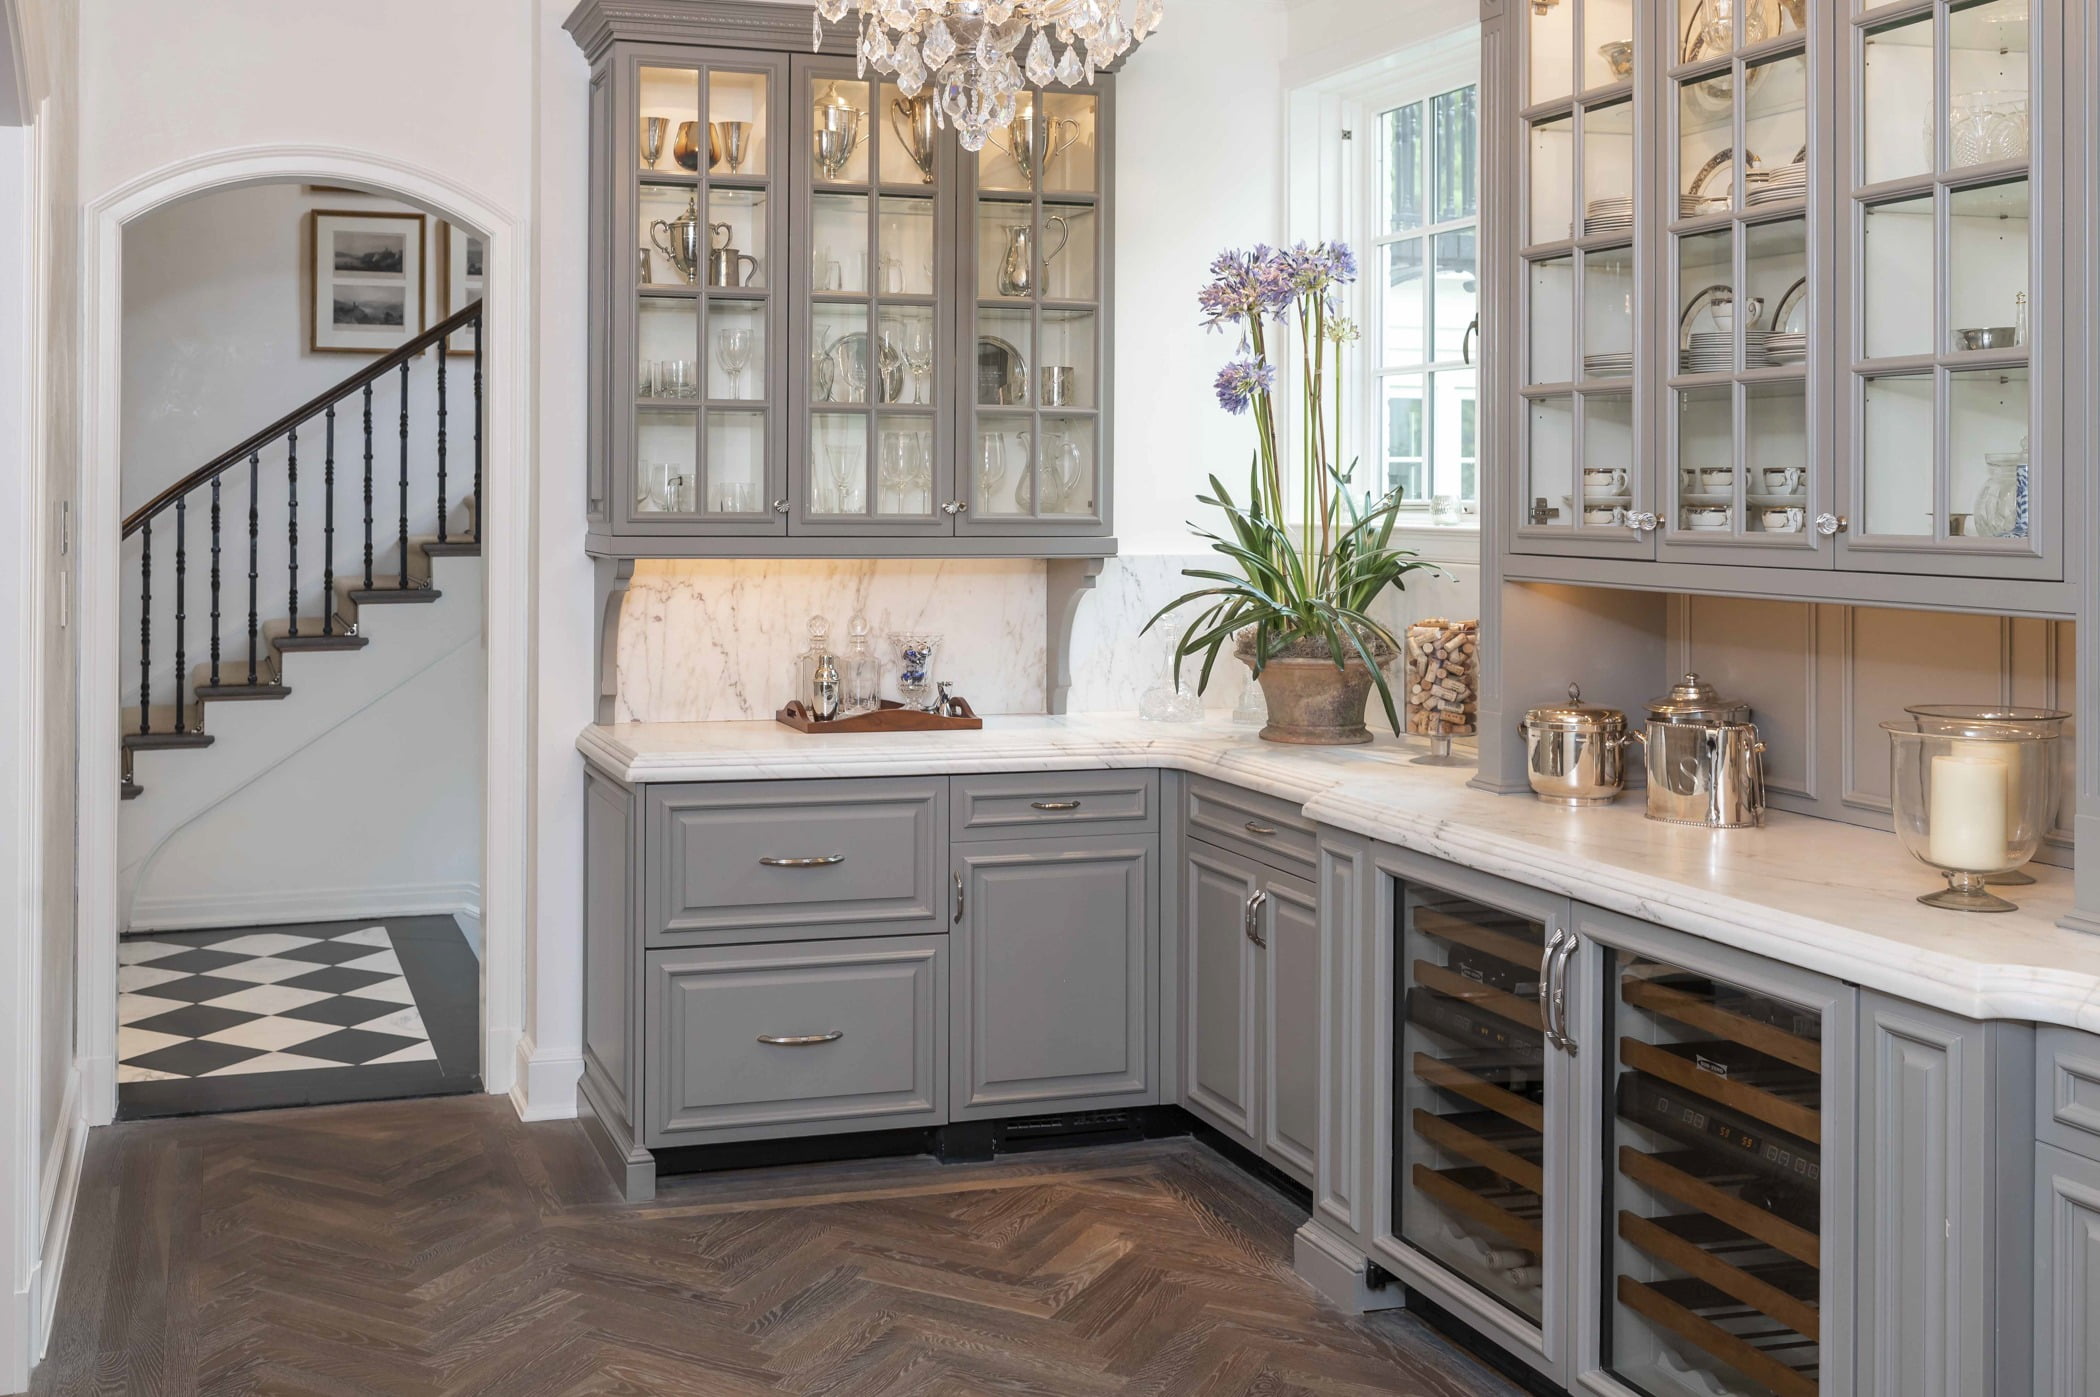 Traditional kitchen area with custom light grey cabinetry, marble countertops, ornate crystal chandelier, and dark chevron hardwood flooring (Doorway view)